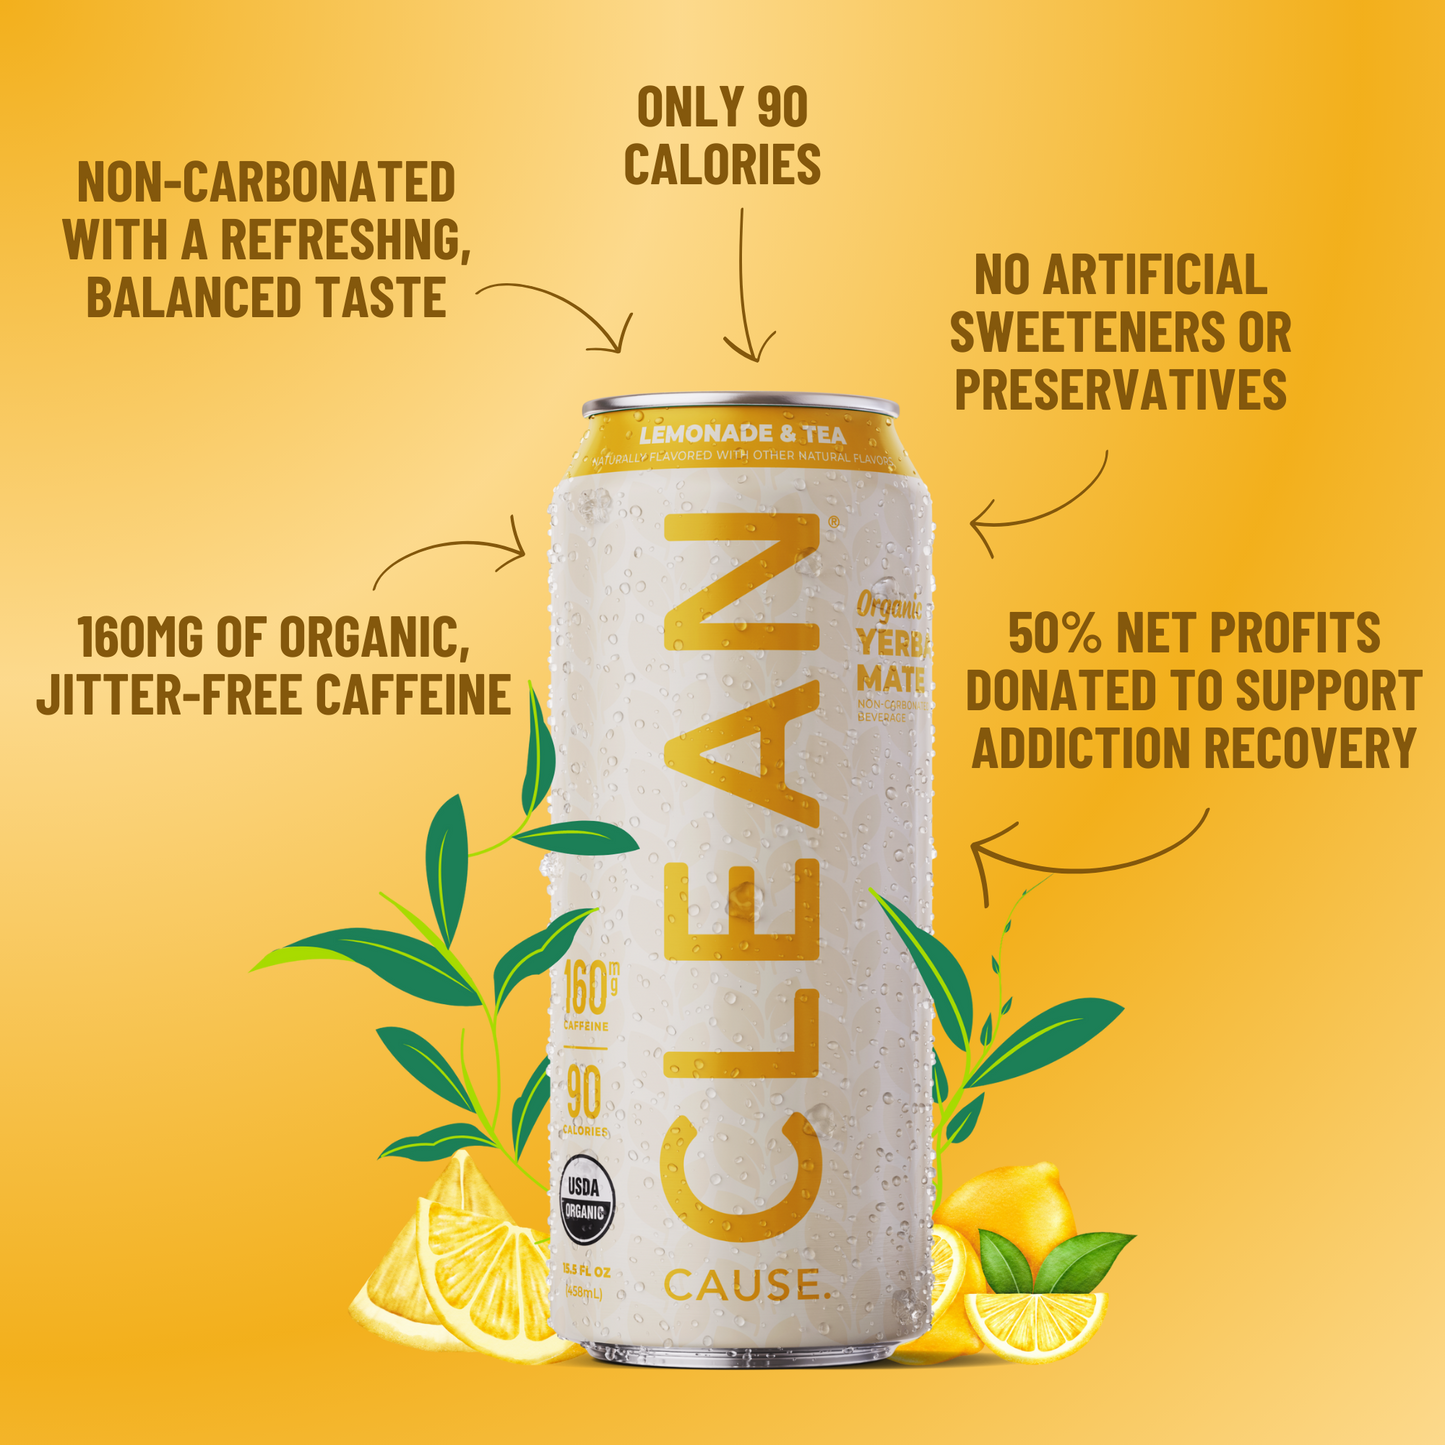 A can of CLEAN Cause Lemonade & tea with little attributes circling it: 160mg of organic jitter-free caffeine, non-carbonated, with a refreshing, balanced taste, only 90 calories, no artificial sweeteners or preservatives, 50% net profits support addiction recovery